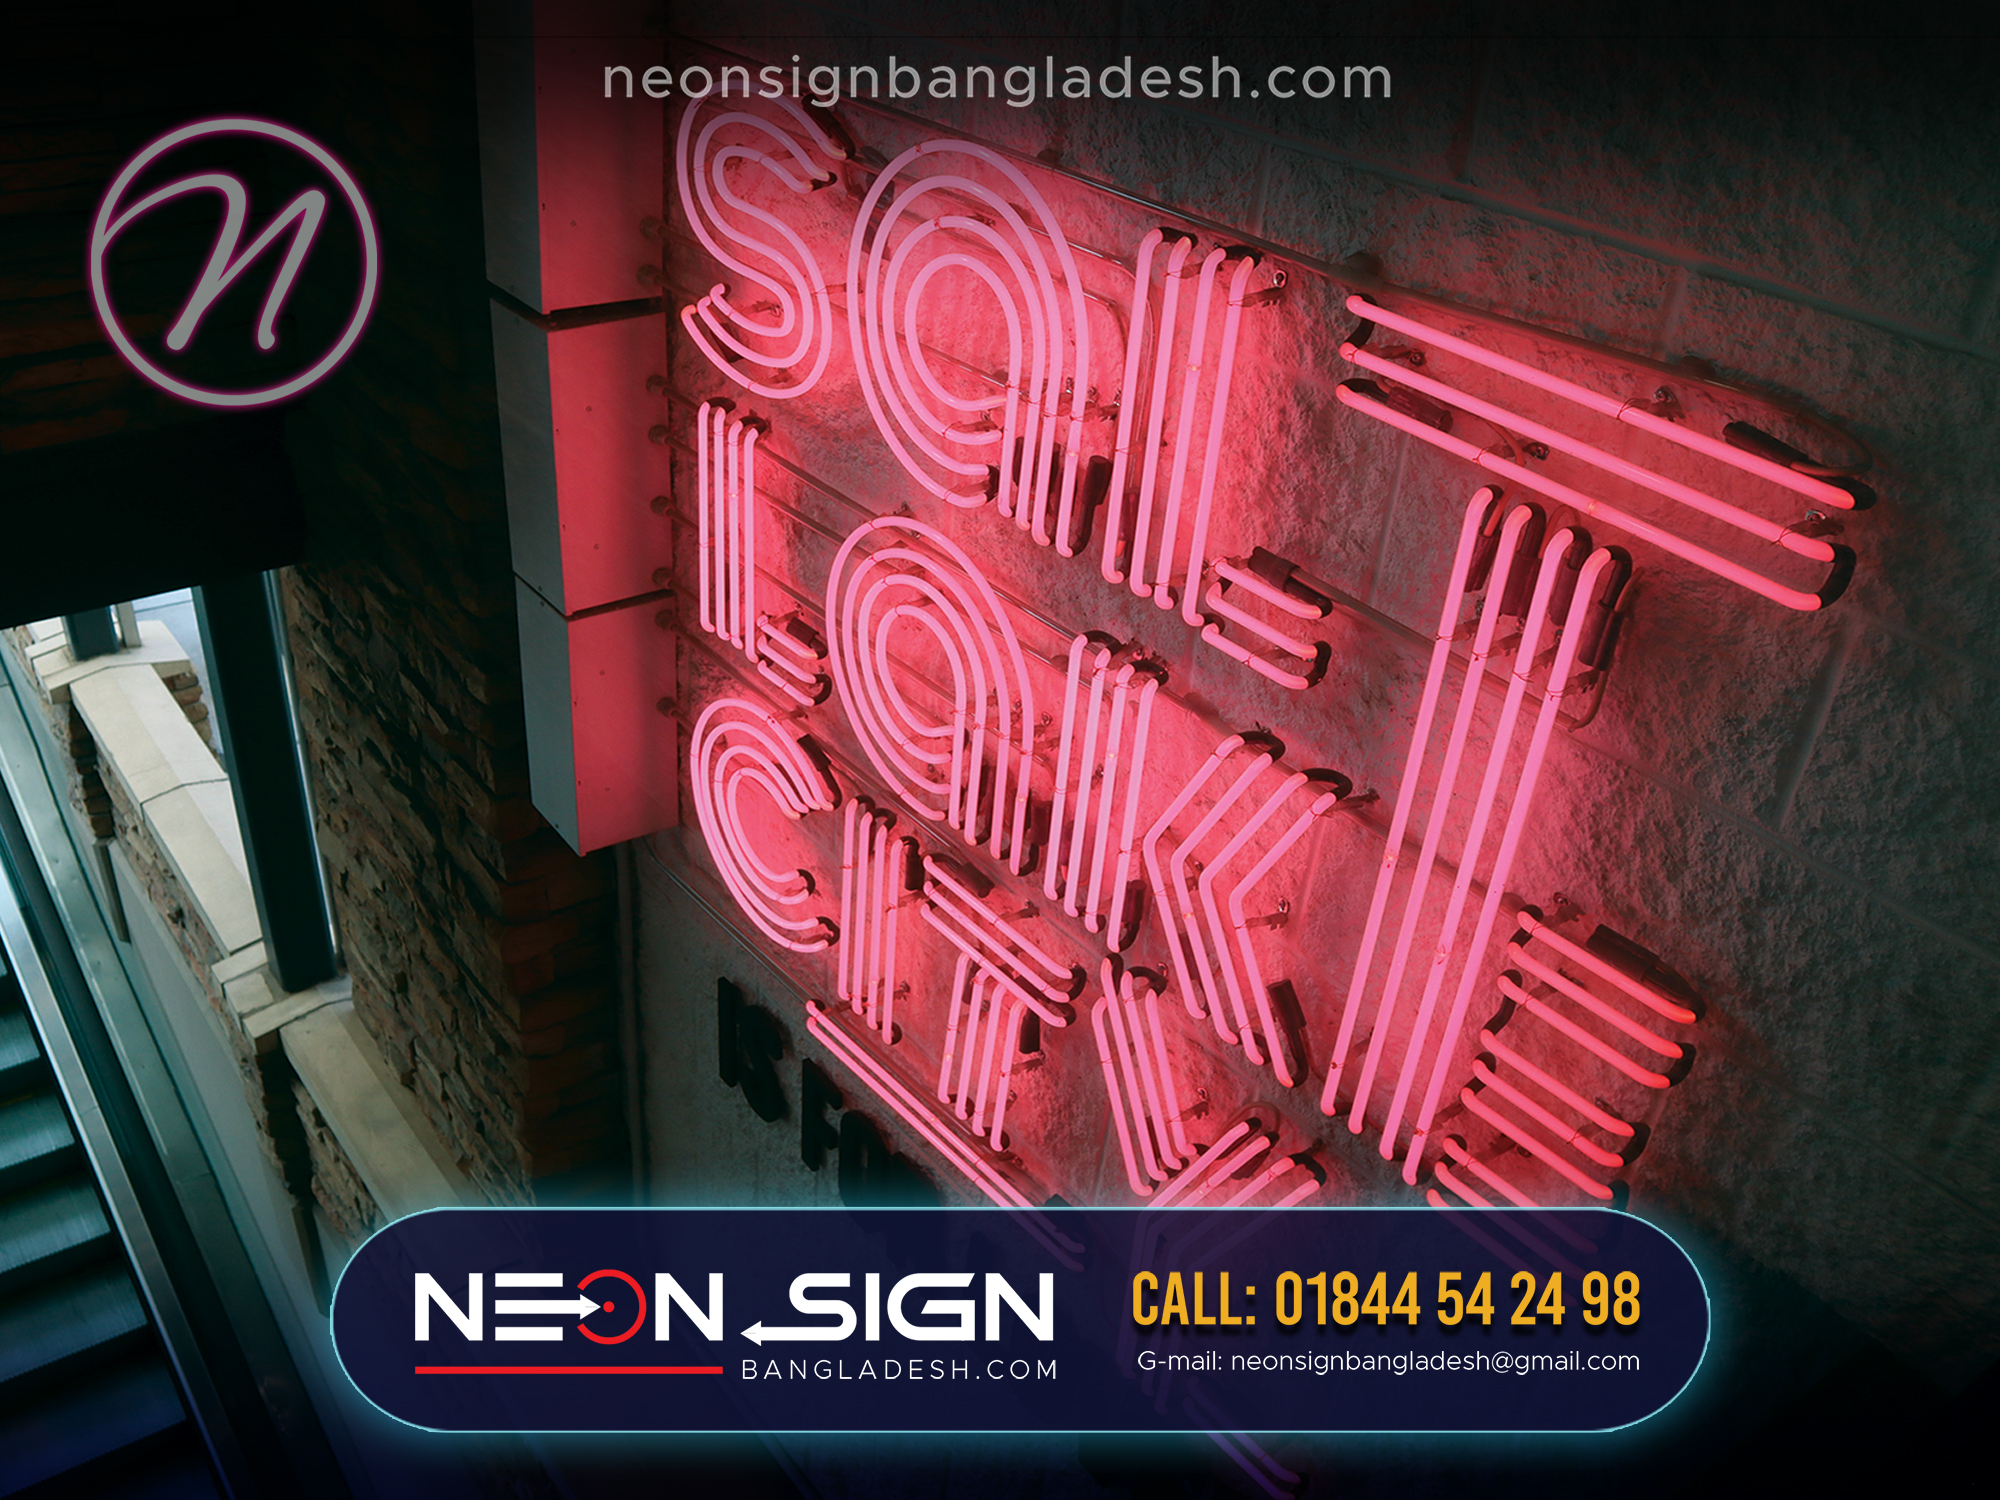 Happy birthday neon signs bd price in bangladesh Happy birthday neon signs bd price Happy birthday neon signs bd online